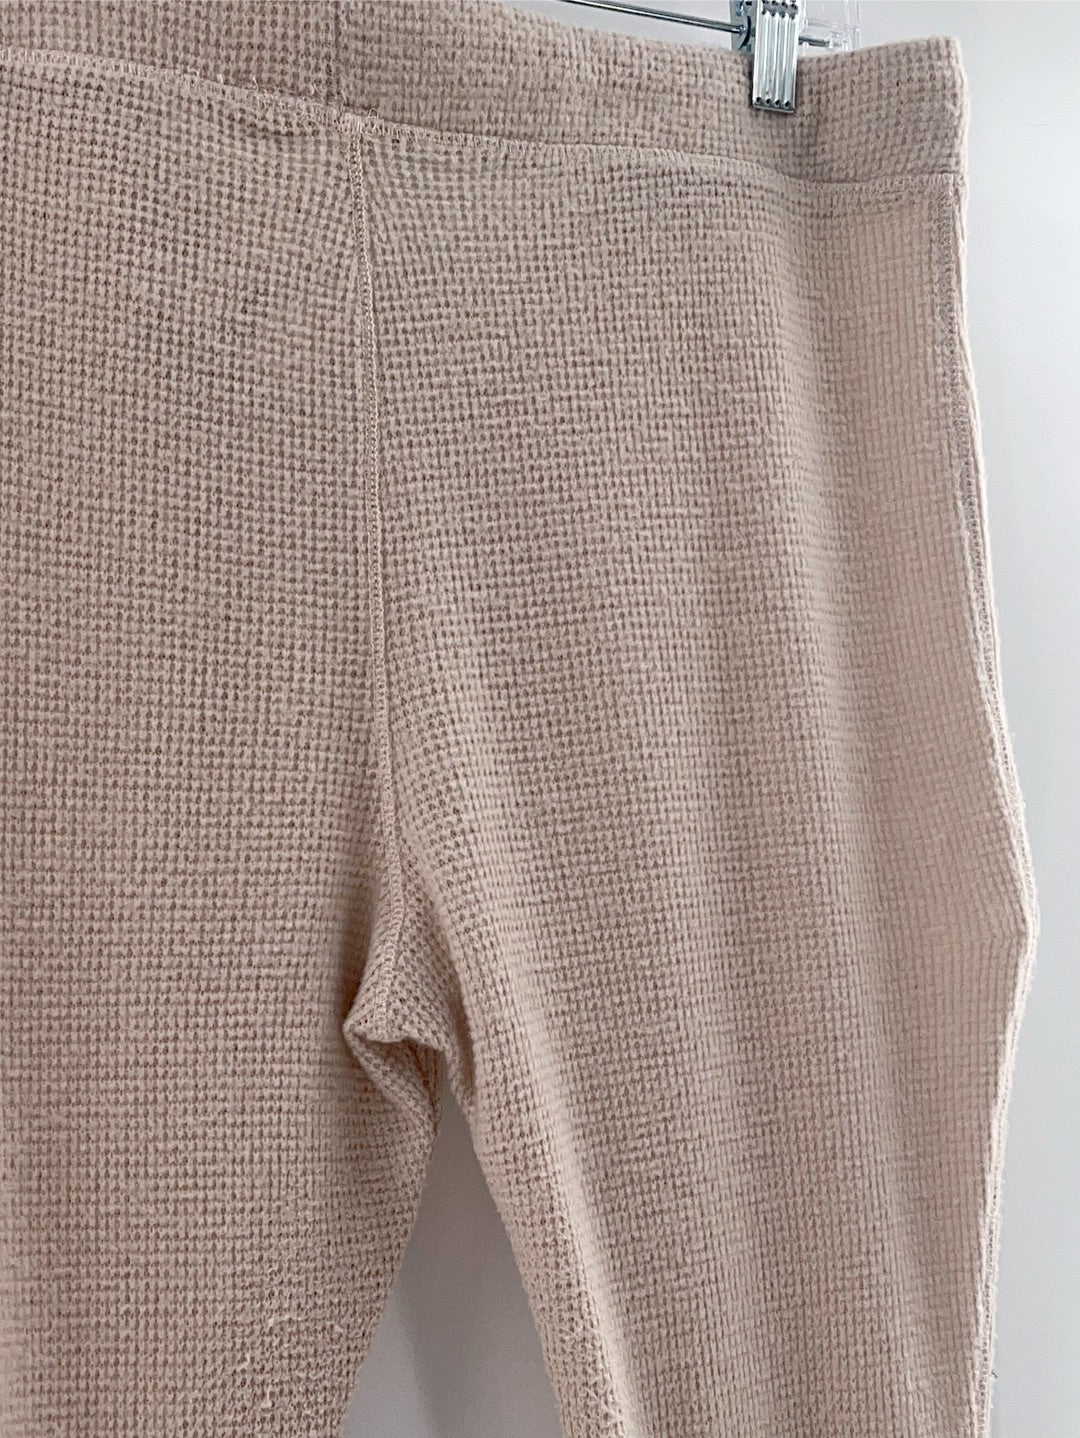 NWT: Intimately by Free People Think Thermal Waffle-Knit Leggings in Latte  XS